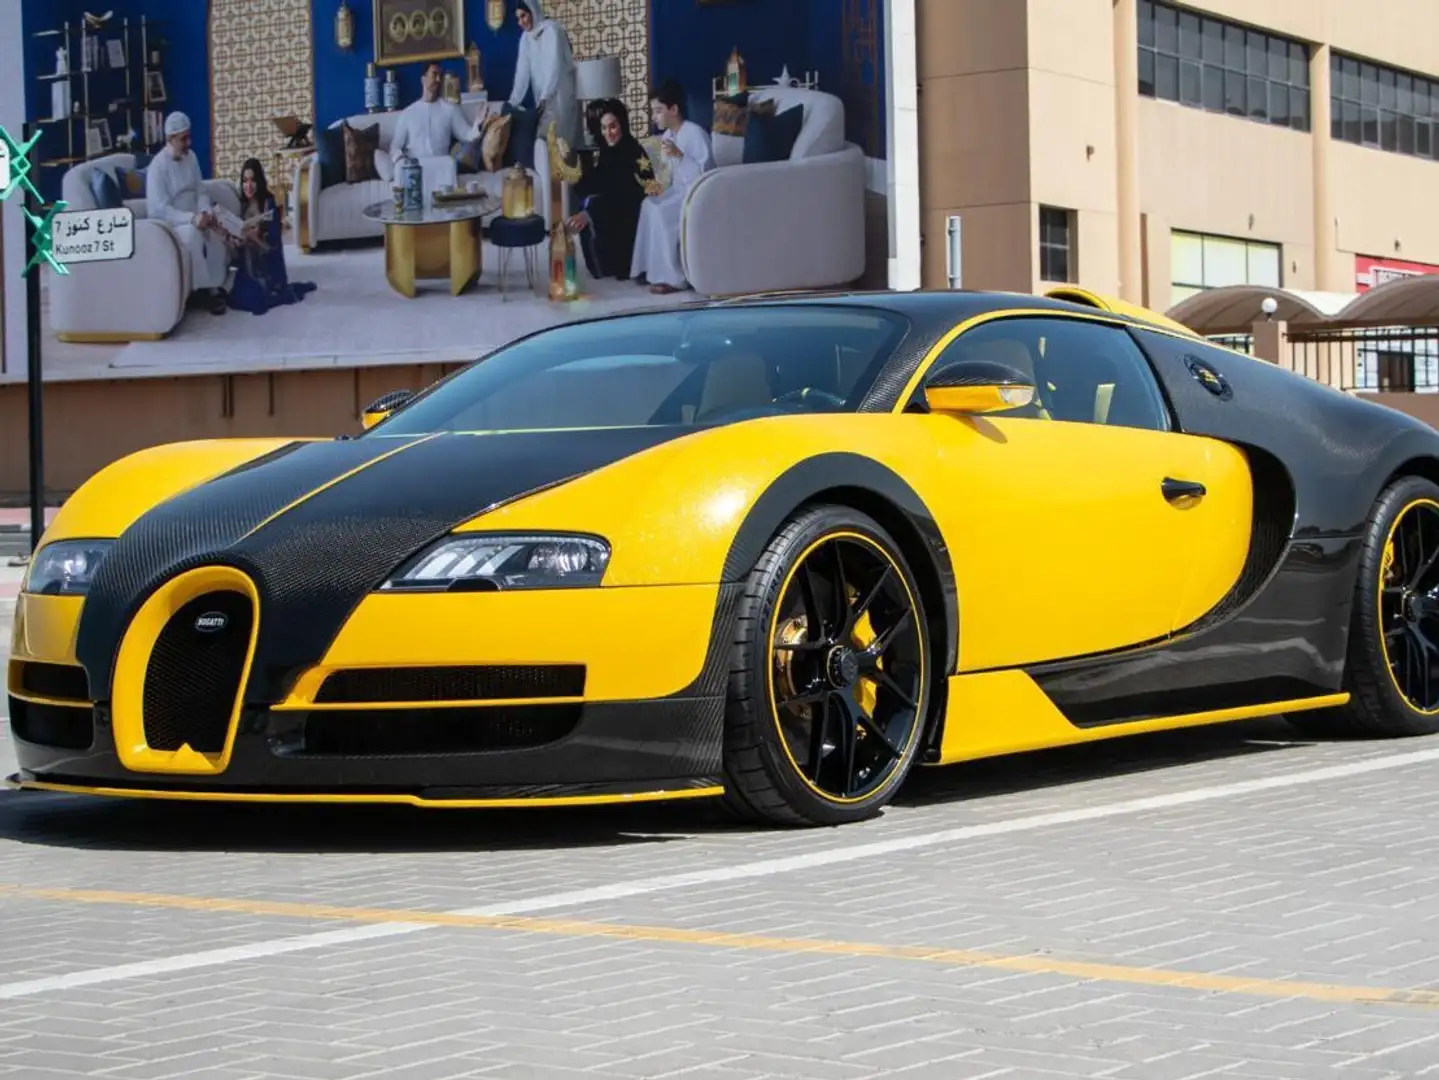 Bugatti Veyron Limited 1 of 1 by Oakley Design It can be Exported Amarillo - 1